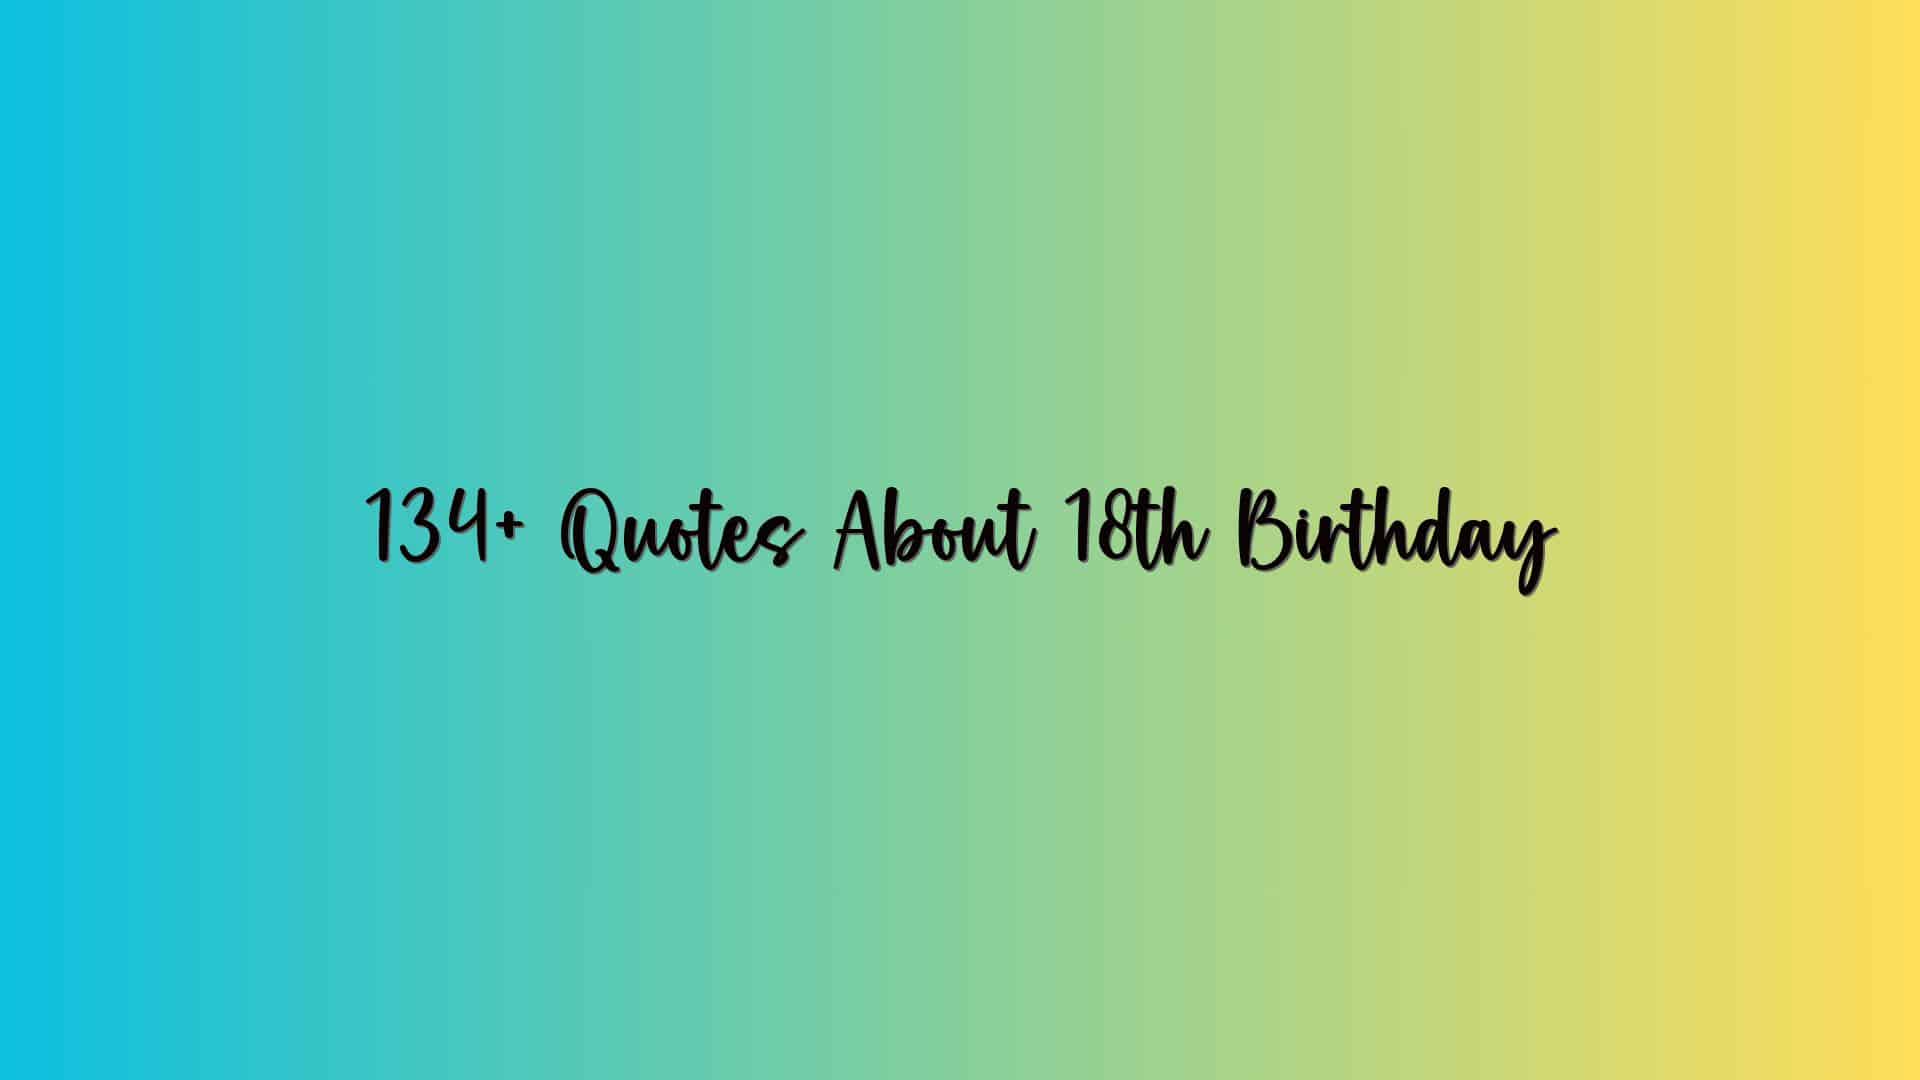 134+ Quotes About 18th Birthday